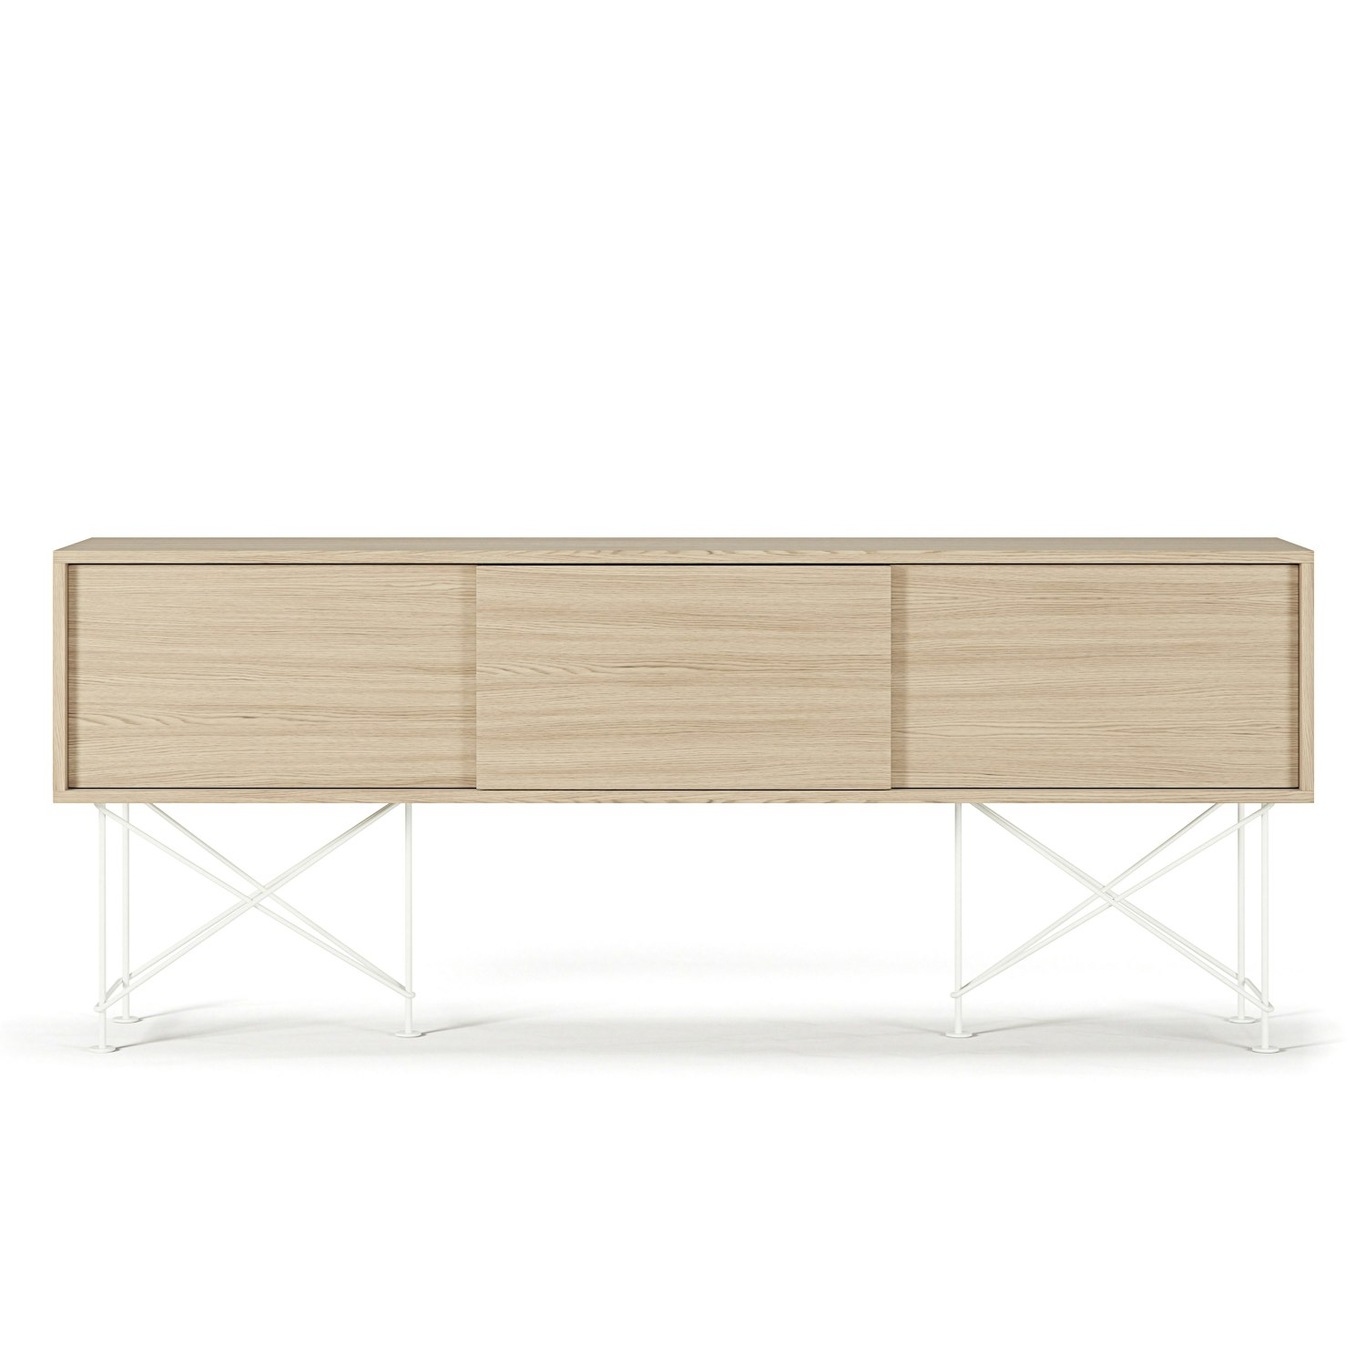 Vogue Media Bench With Stand 180 cm, White Oak / White